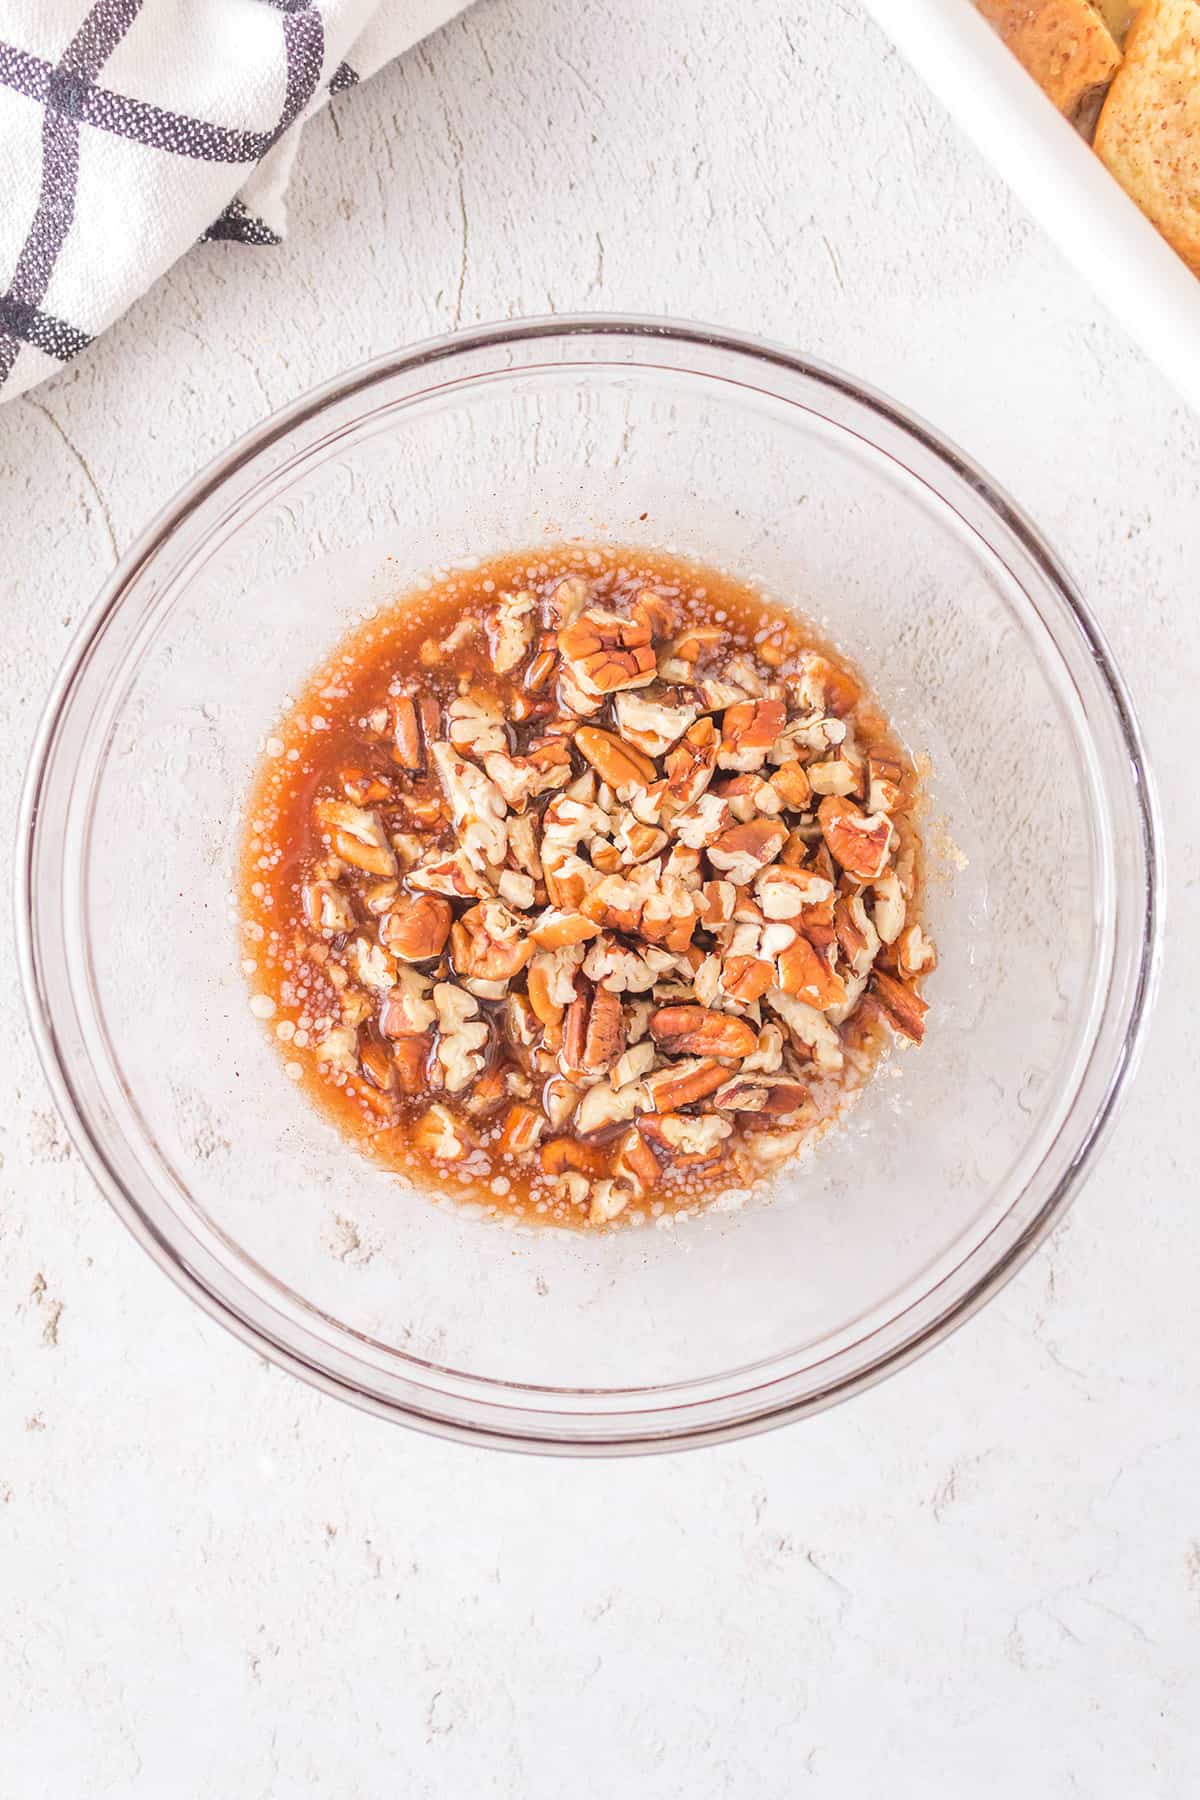 Pecan topping mixture in a bowl.